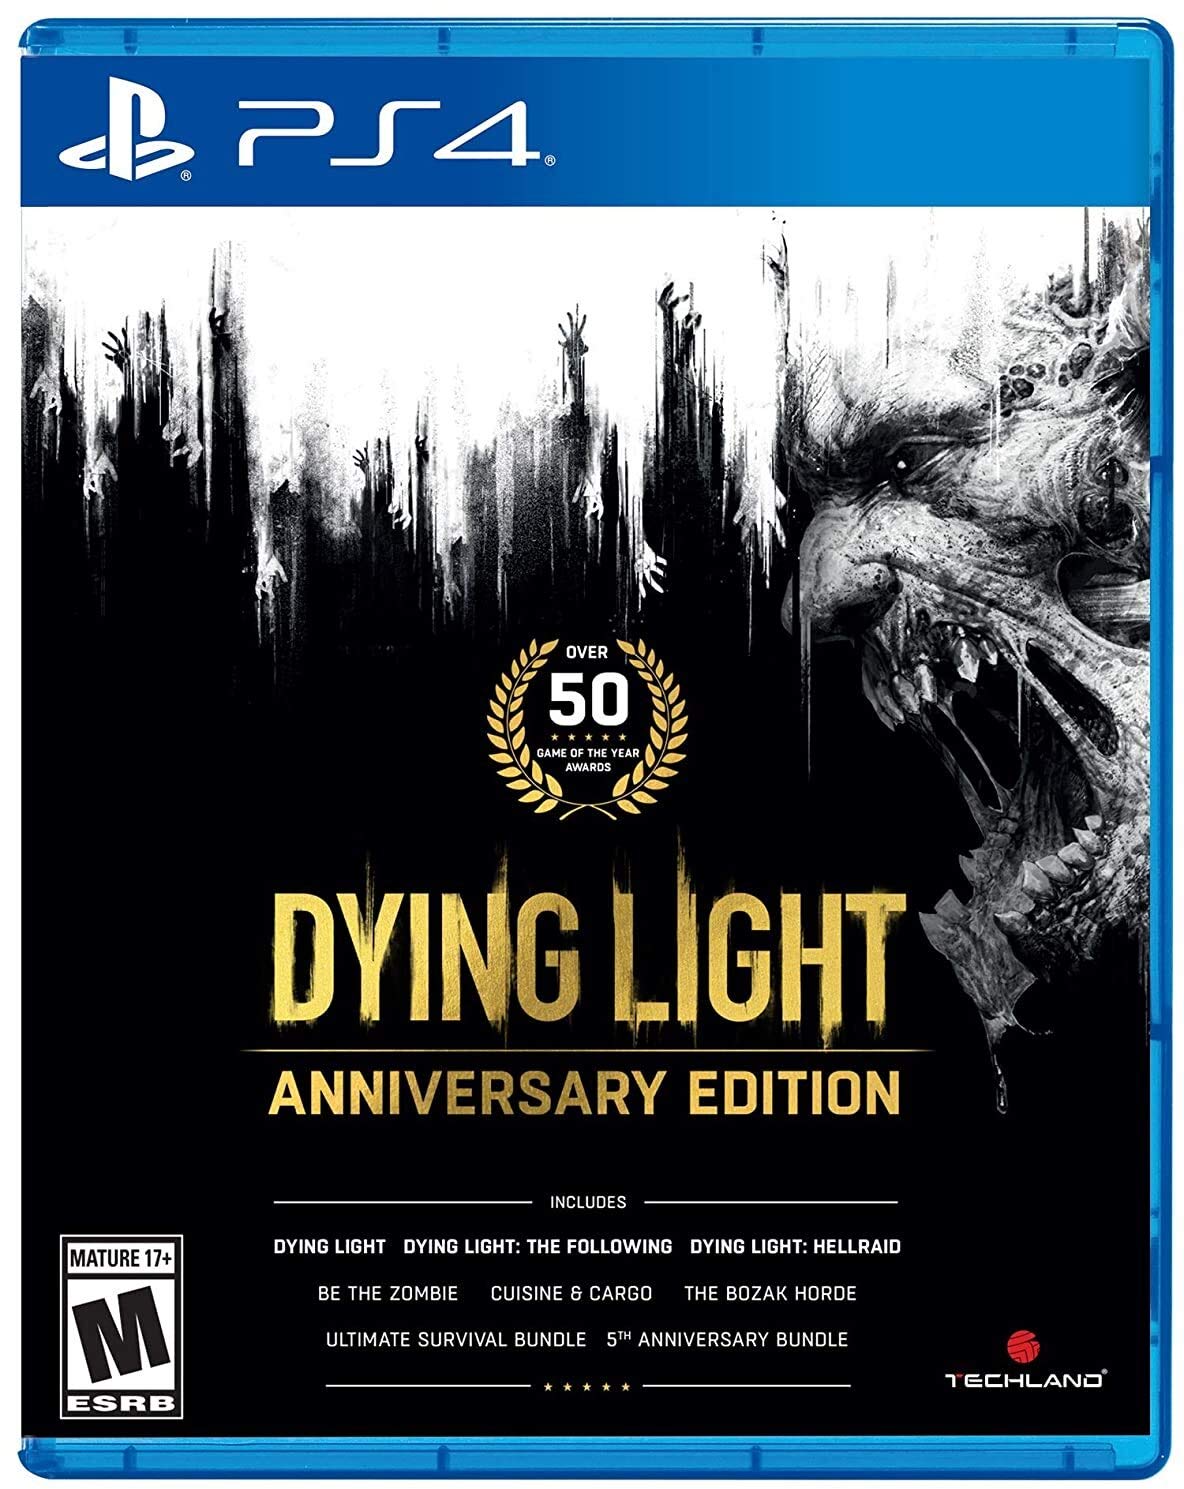 Dying Light - Anniversary Edition (PS4), Techland